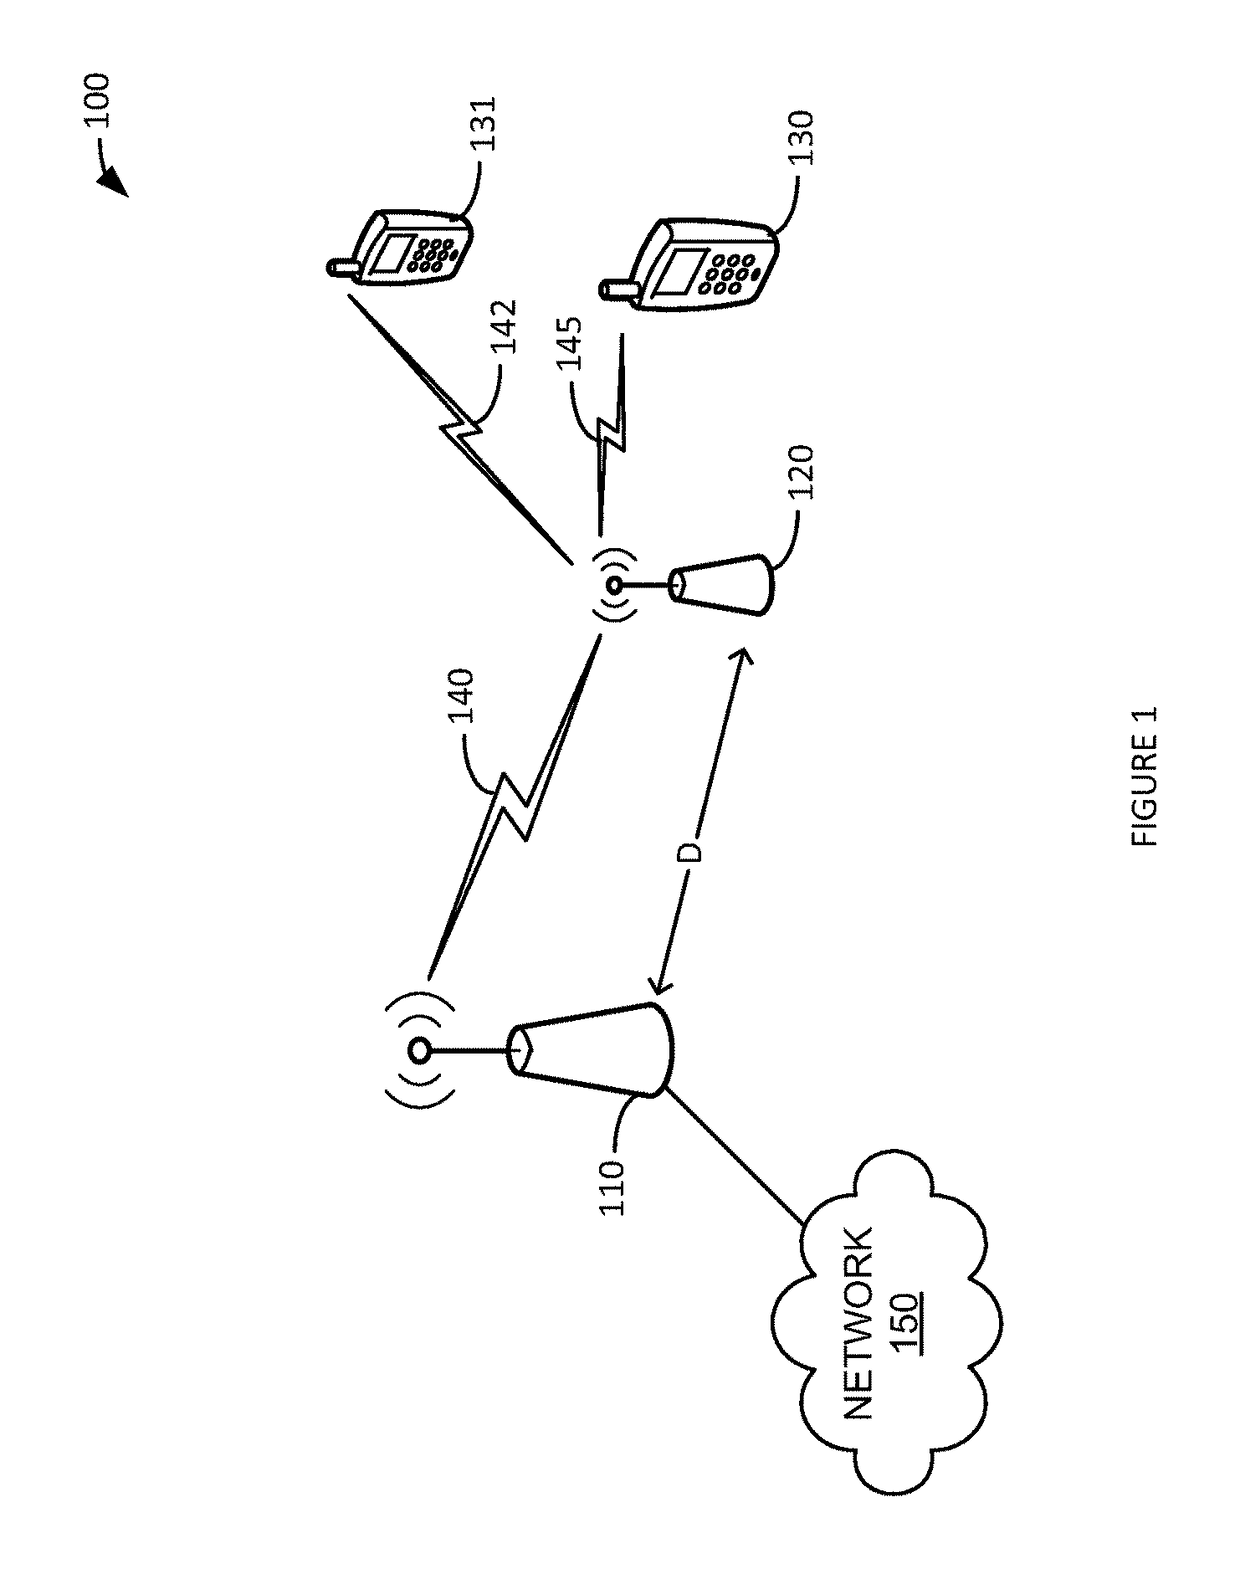 Quality of service enhancement for wireless relay networks